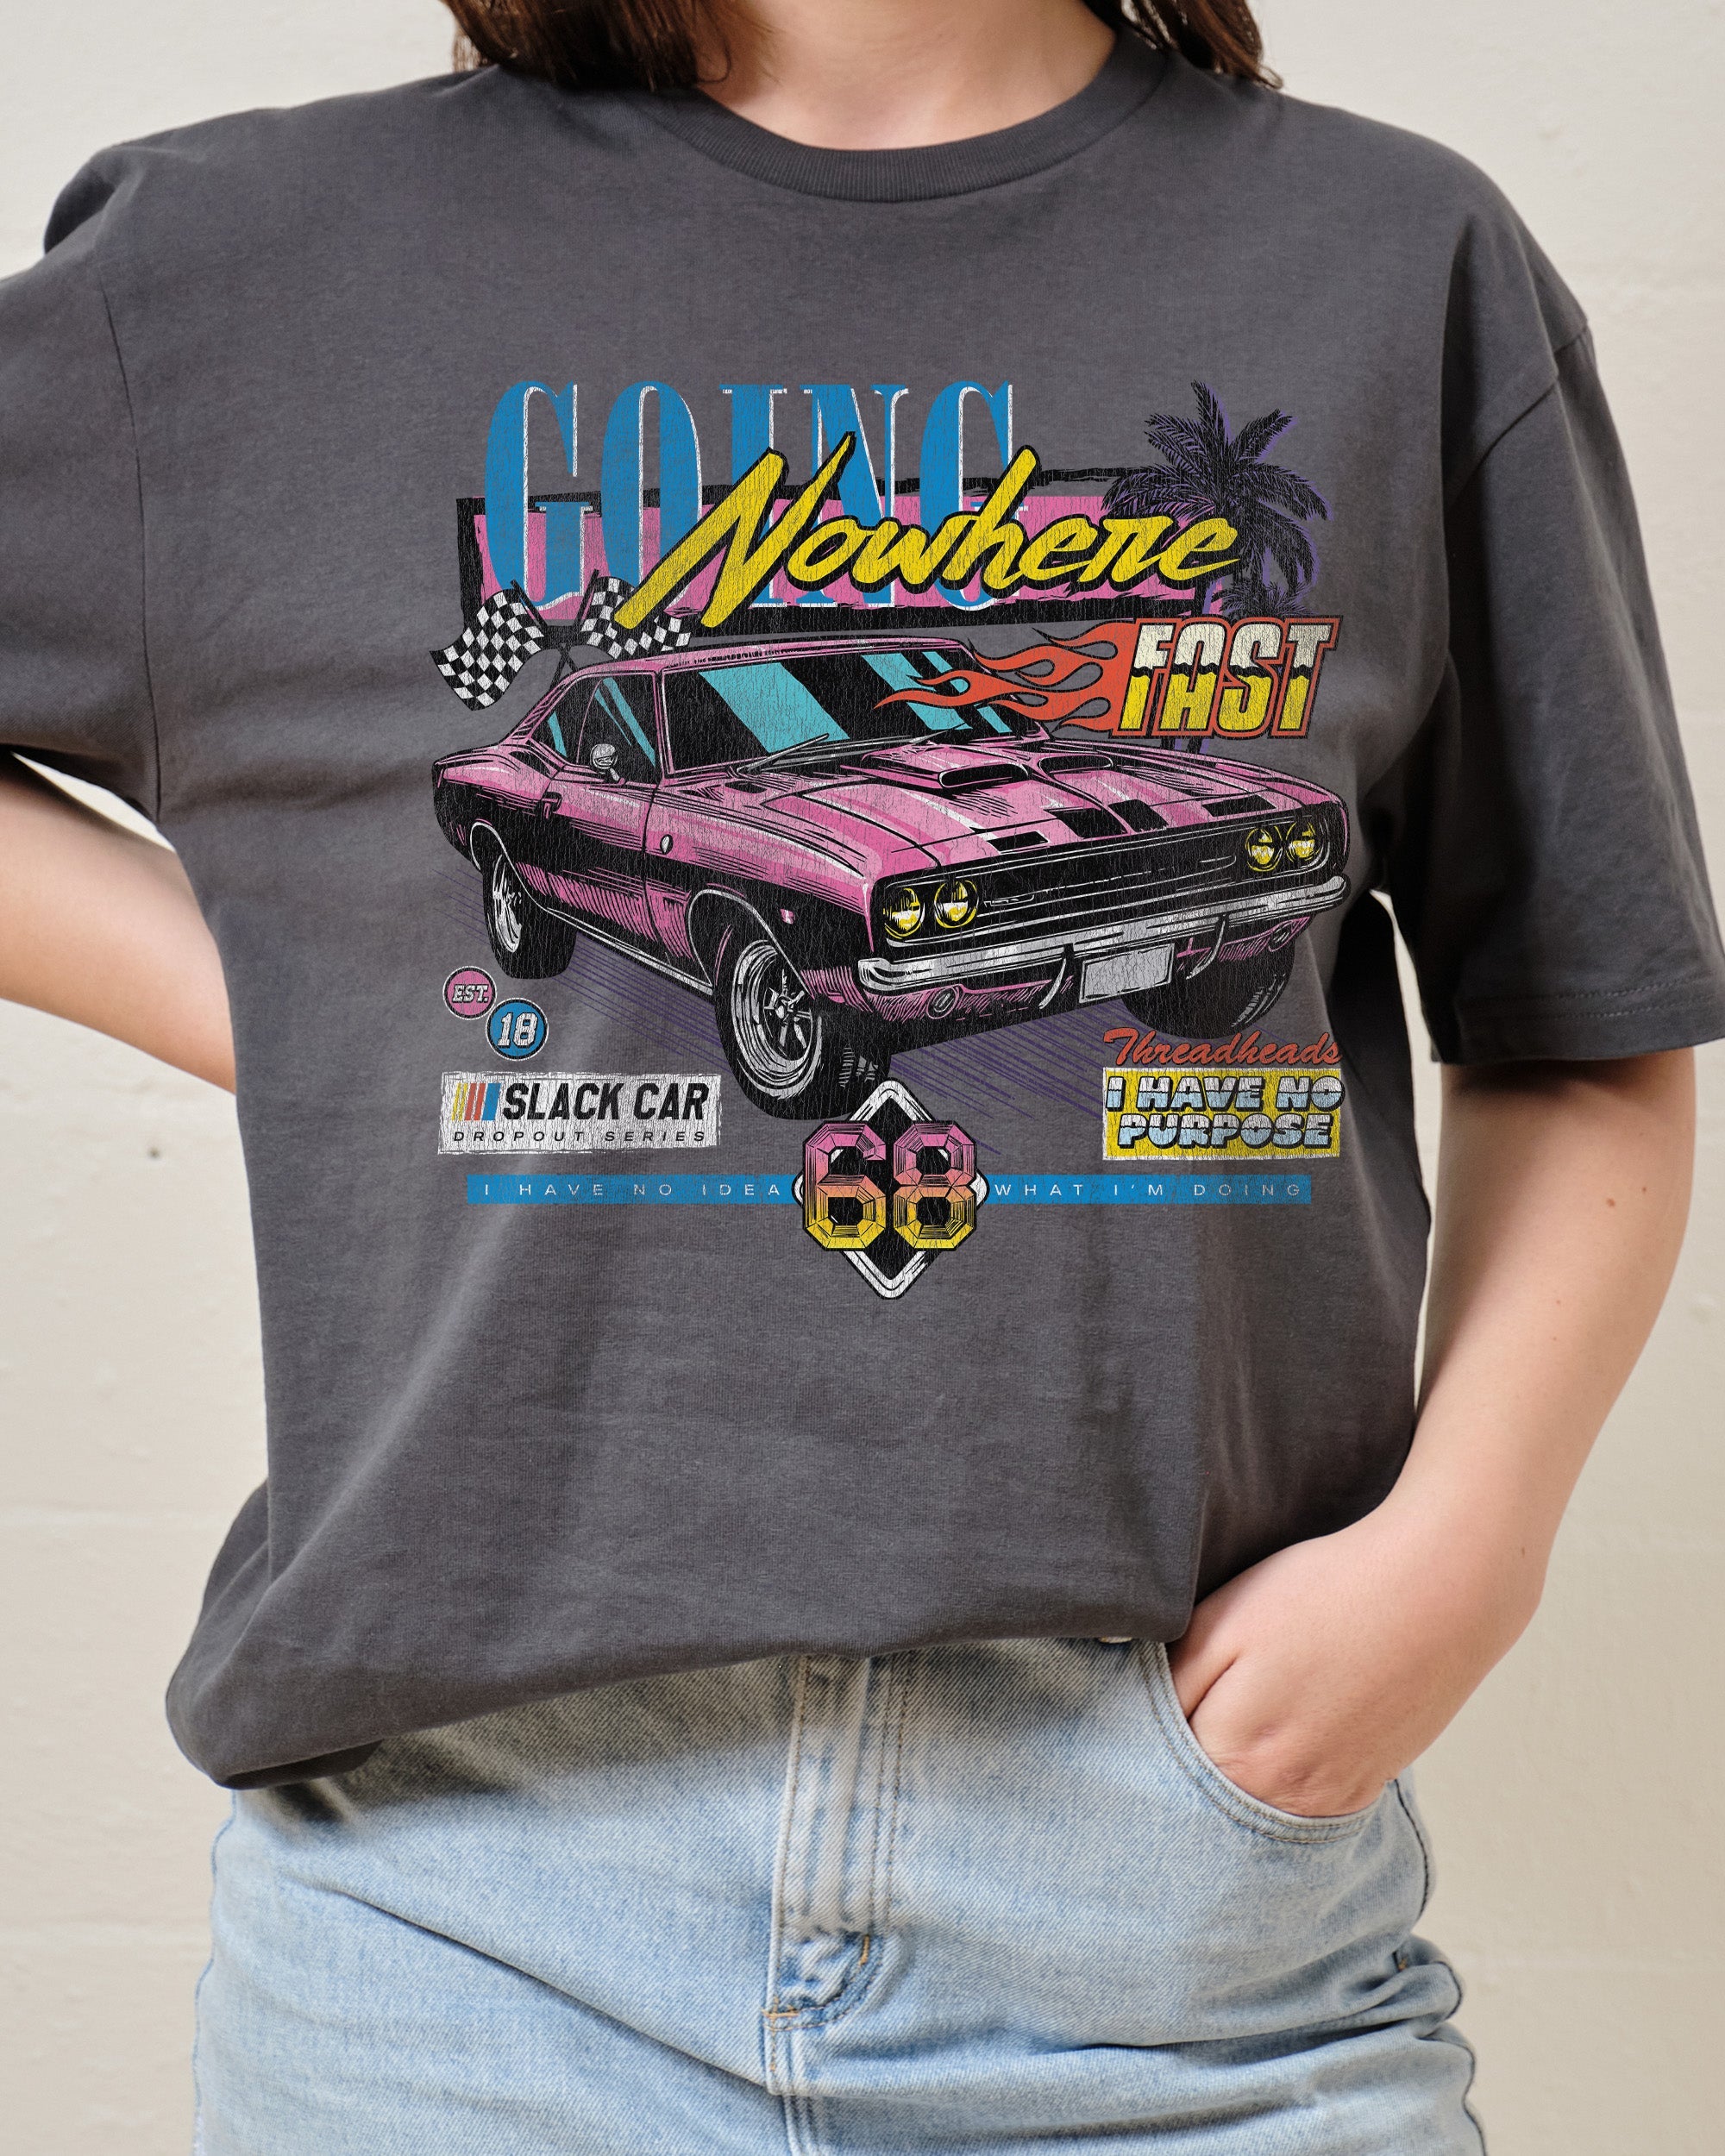 Going Nowhere Fast T-Shirt